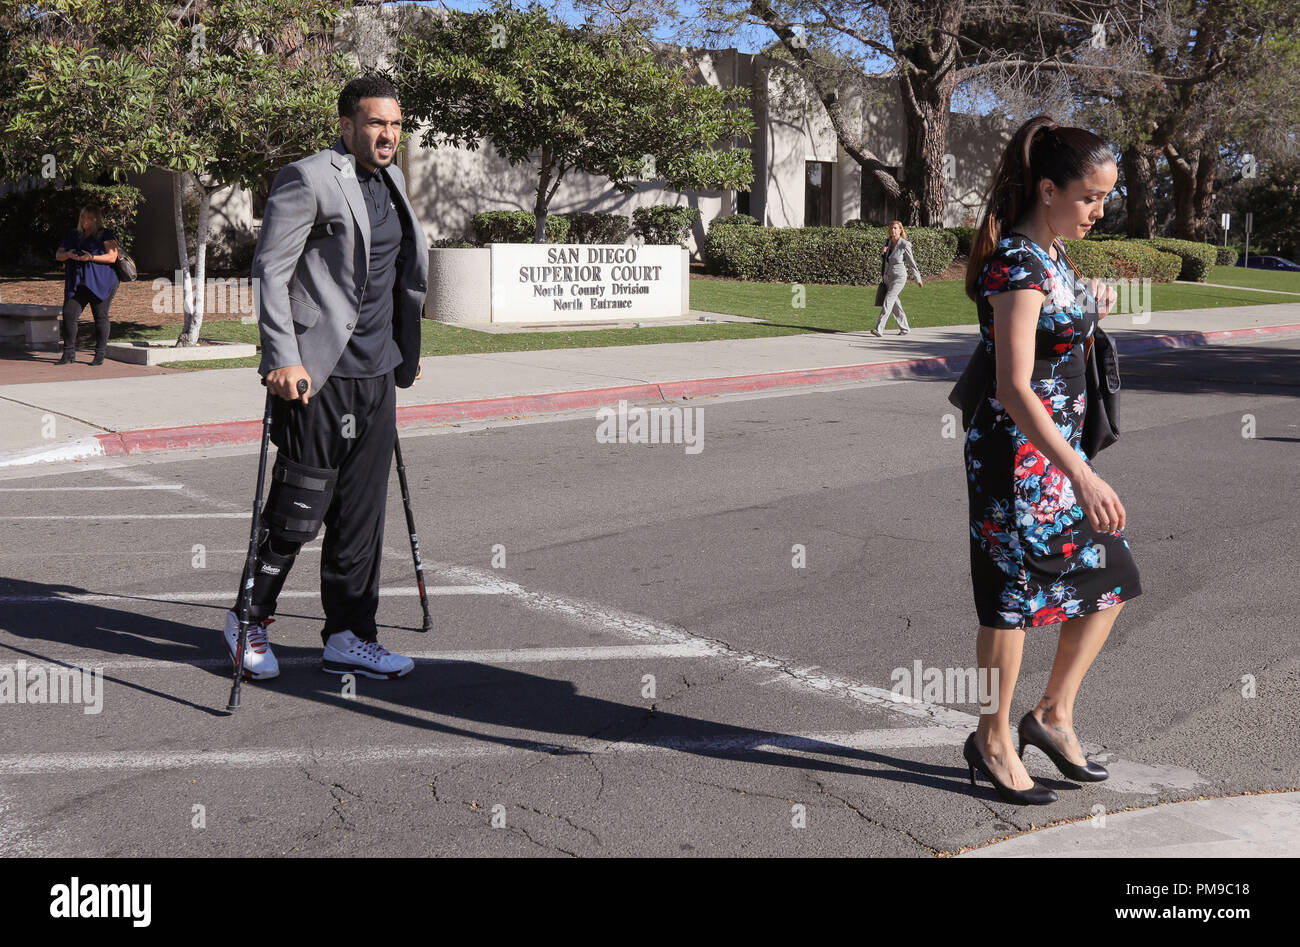 Vista, California, USA. 17th Sep, 2018. KELLEN WINSLOW II and his wife Janelle leave San Diego Superior Court after a preliminary hearing scheduled for today was postponed until October 15th. Winslow is charged with raping an unconscious teen in 2003. His attorneys asked to have the hearing postponed as their client recovers from knee-replacement surgery. Credit: Charlie Neuman/ZUMA Wire/Alamy Live News Stock Photo